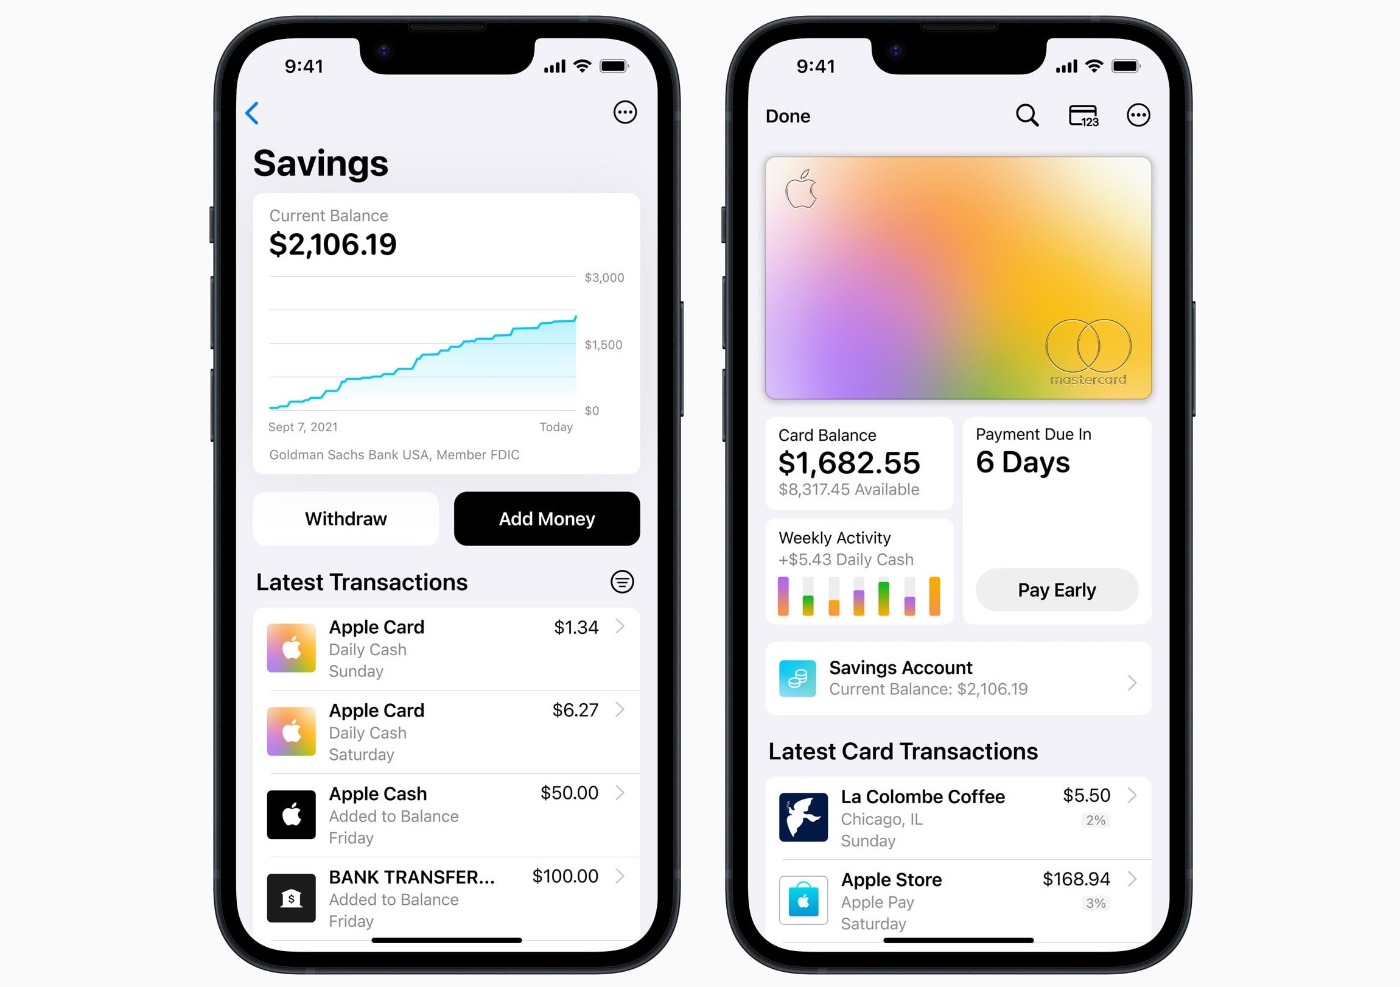 Tim Cook: Apple Card savings account is ‘incredible’ and offers ‘a healthier financial life’